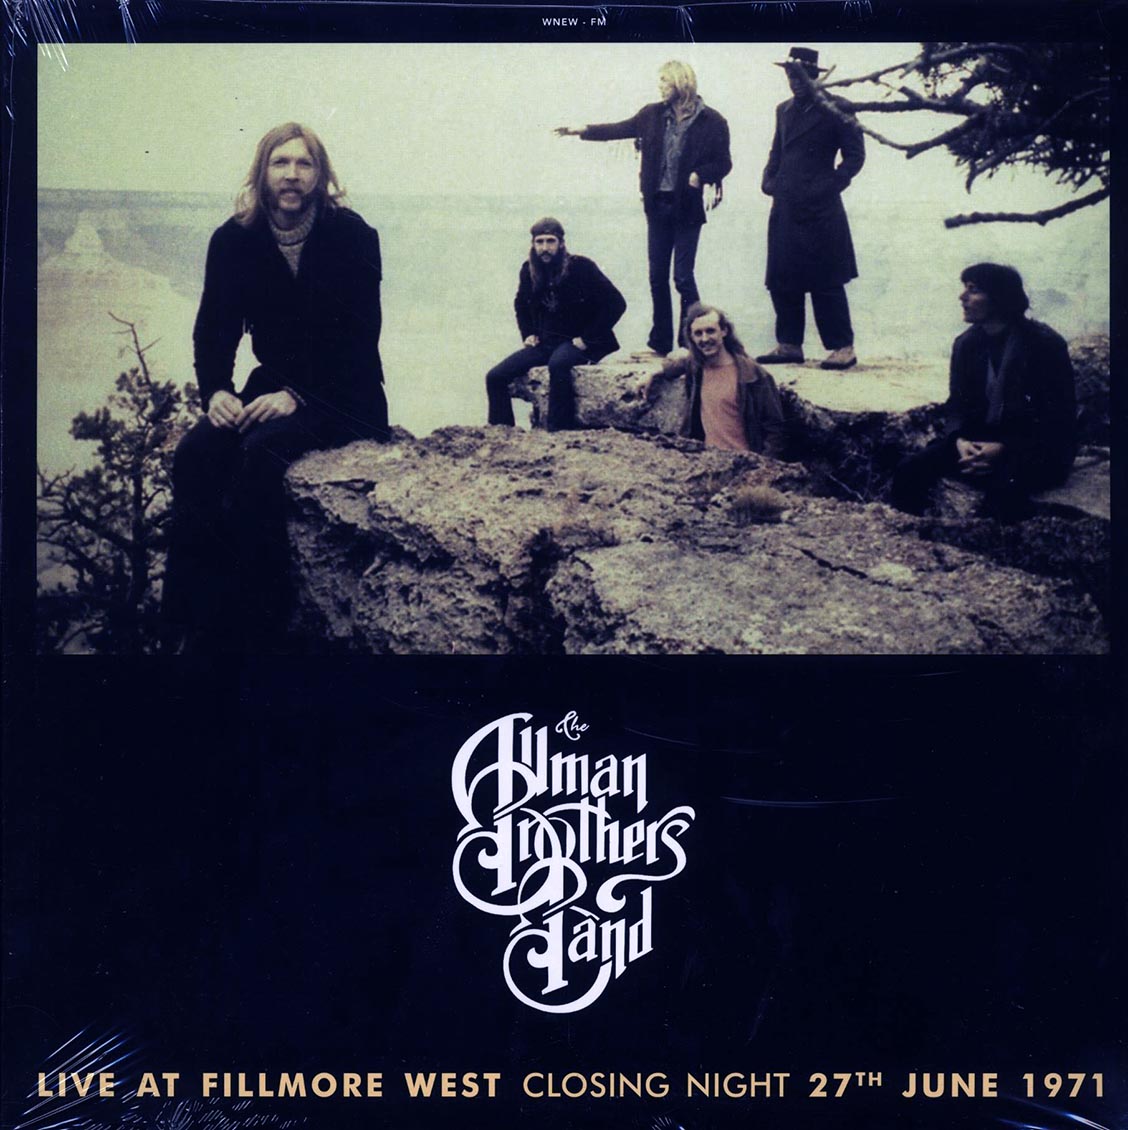 The Allman Brothers Band - Live At Fillmore West, Closing Night, 27th June, 1971 (2xLP) - Vinyl LP